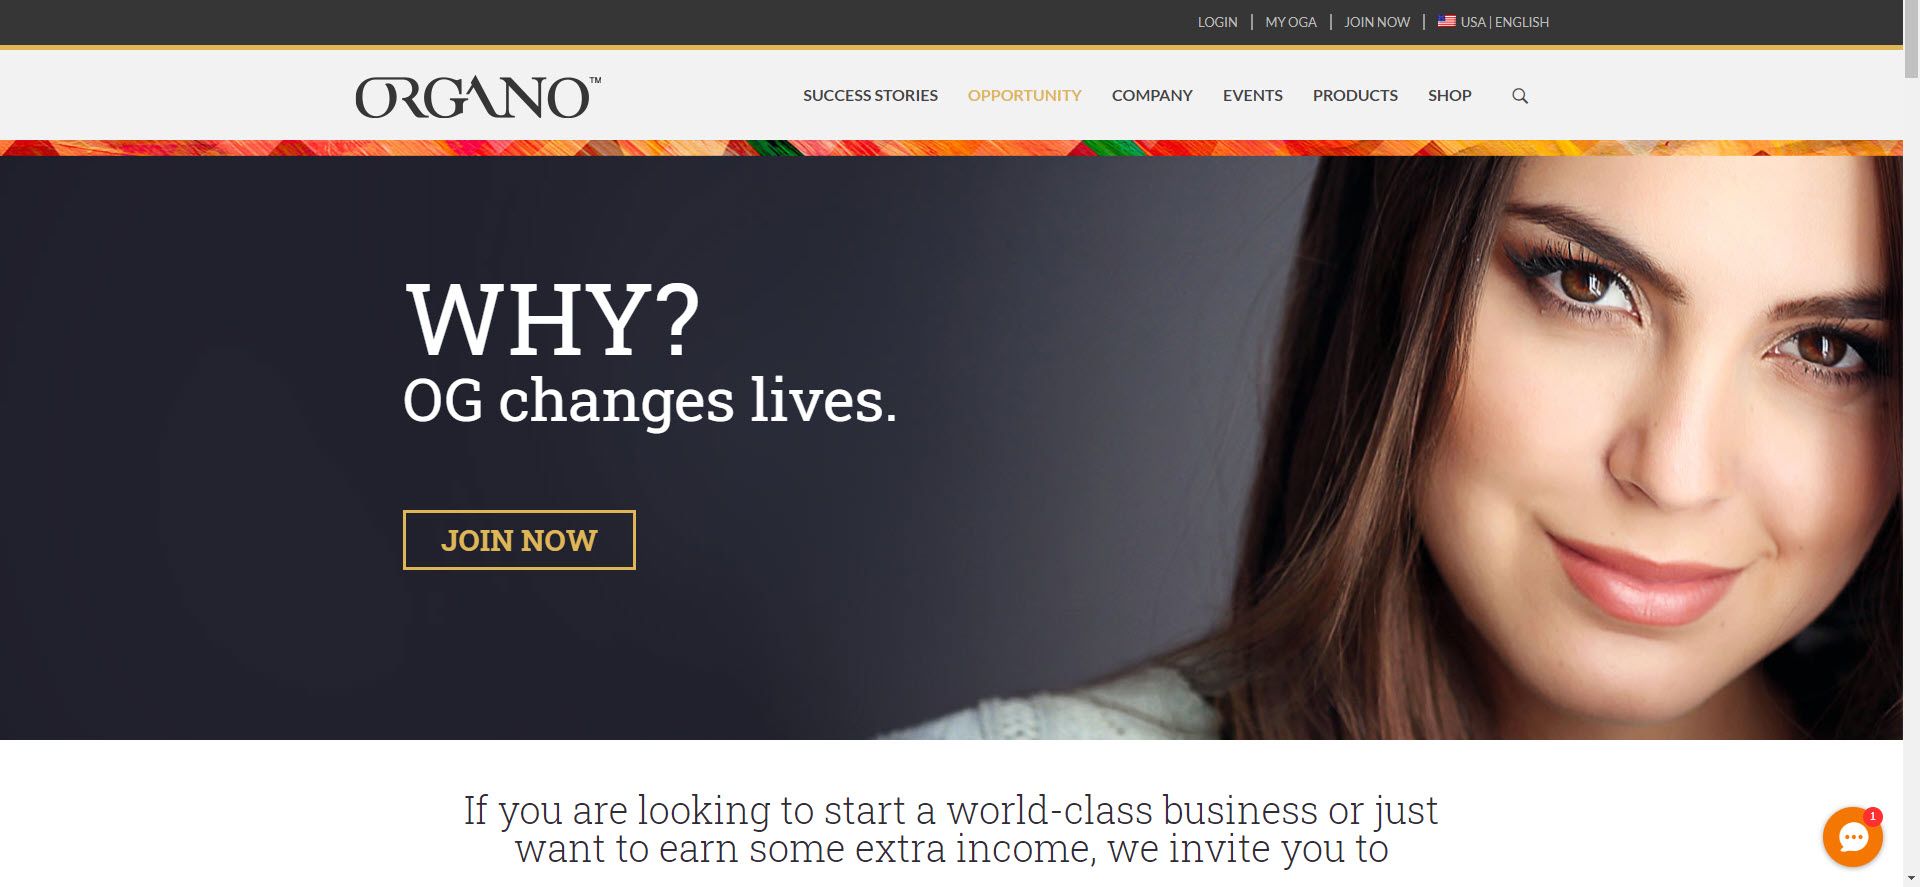 Organo MLM Review - Affiliate